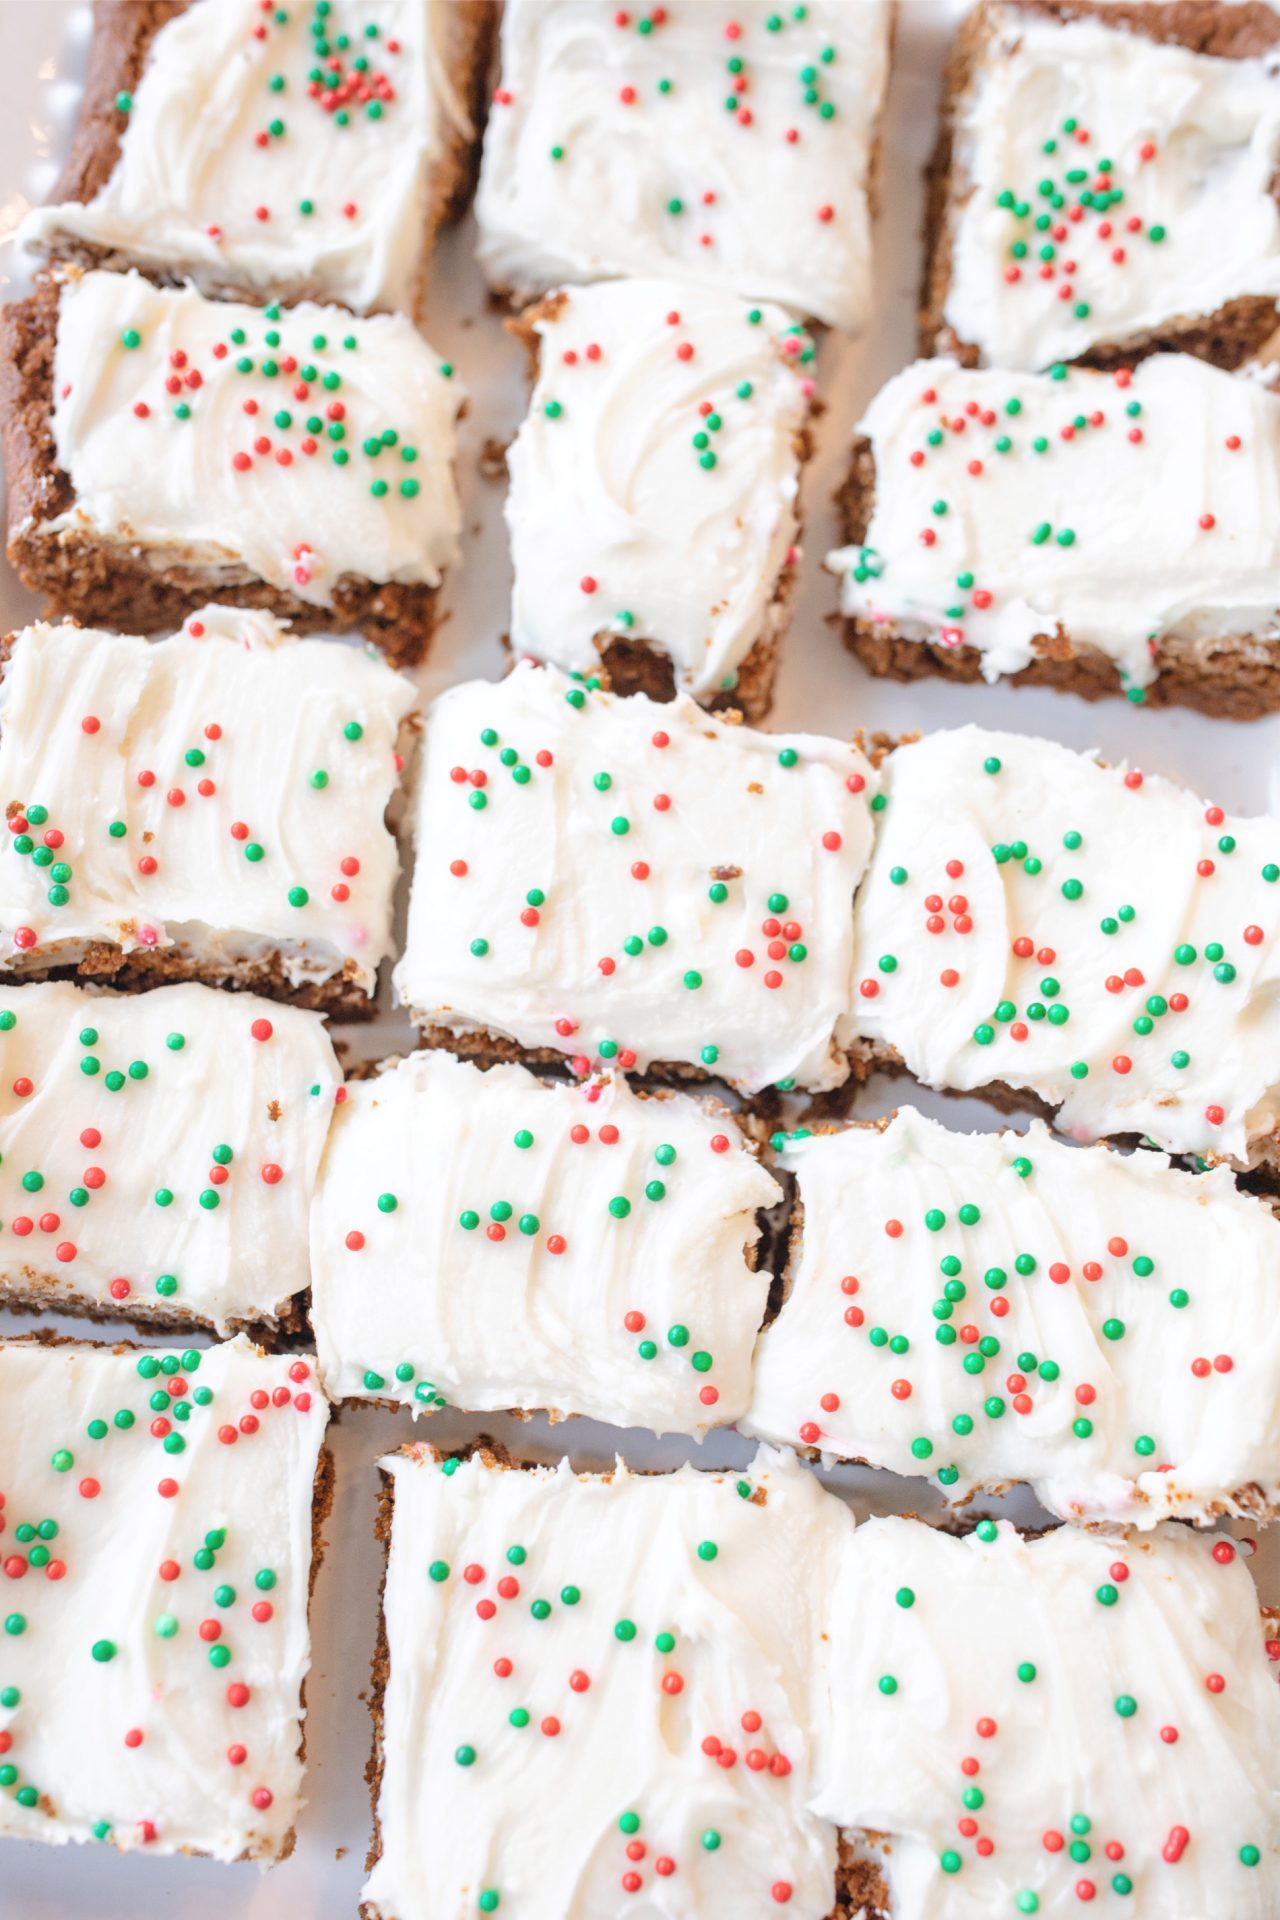 gingerbread, gingerbread cookies, gingerbread bars, gluten free, gluten free gingerbread, healthy, Christmas cookies, holiday cookies, gingerbread, cream cheese frosting, dairy free, cream cheese icing, cream cheese frosting, party